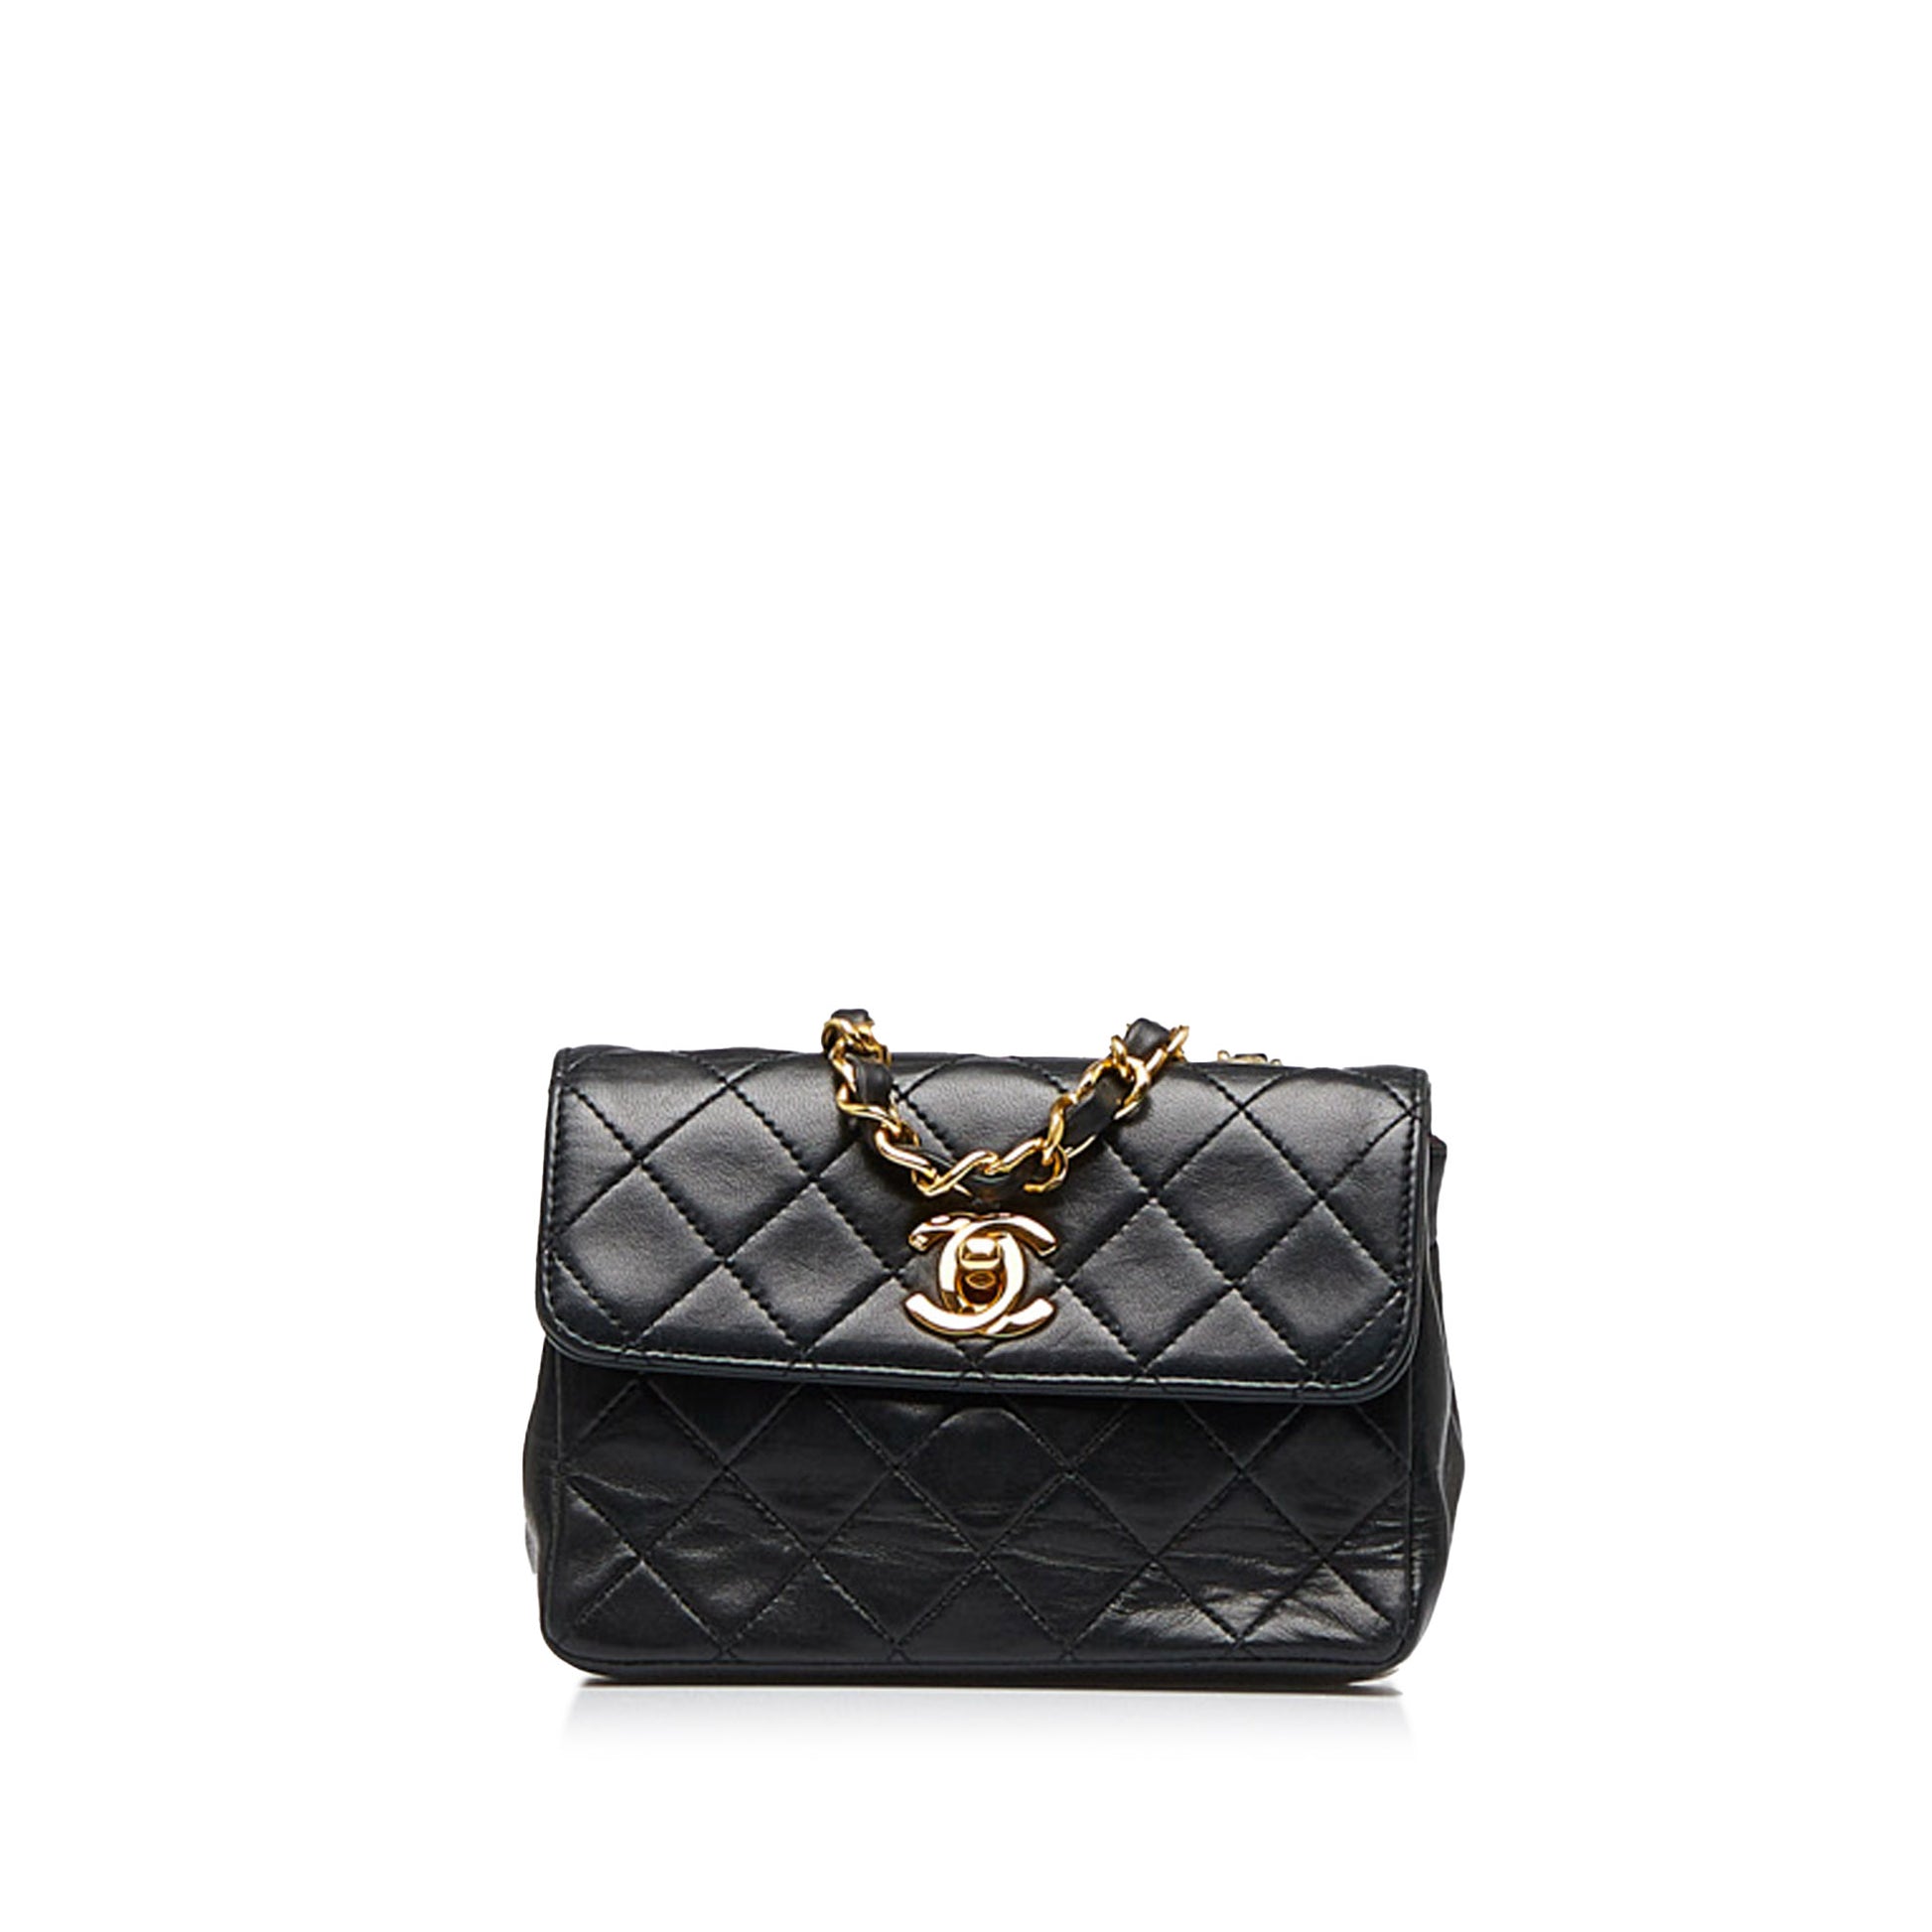 Chanel - a classic double flap bag in charcoal grey jers…